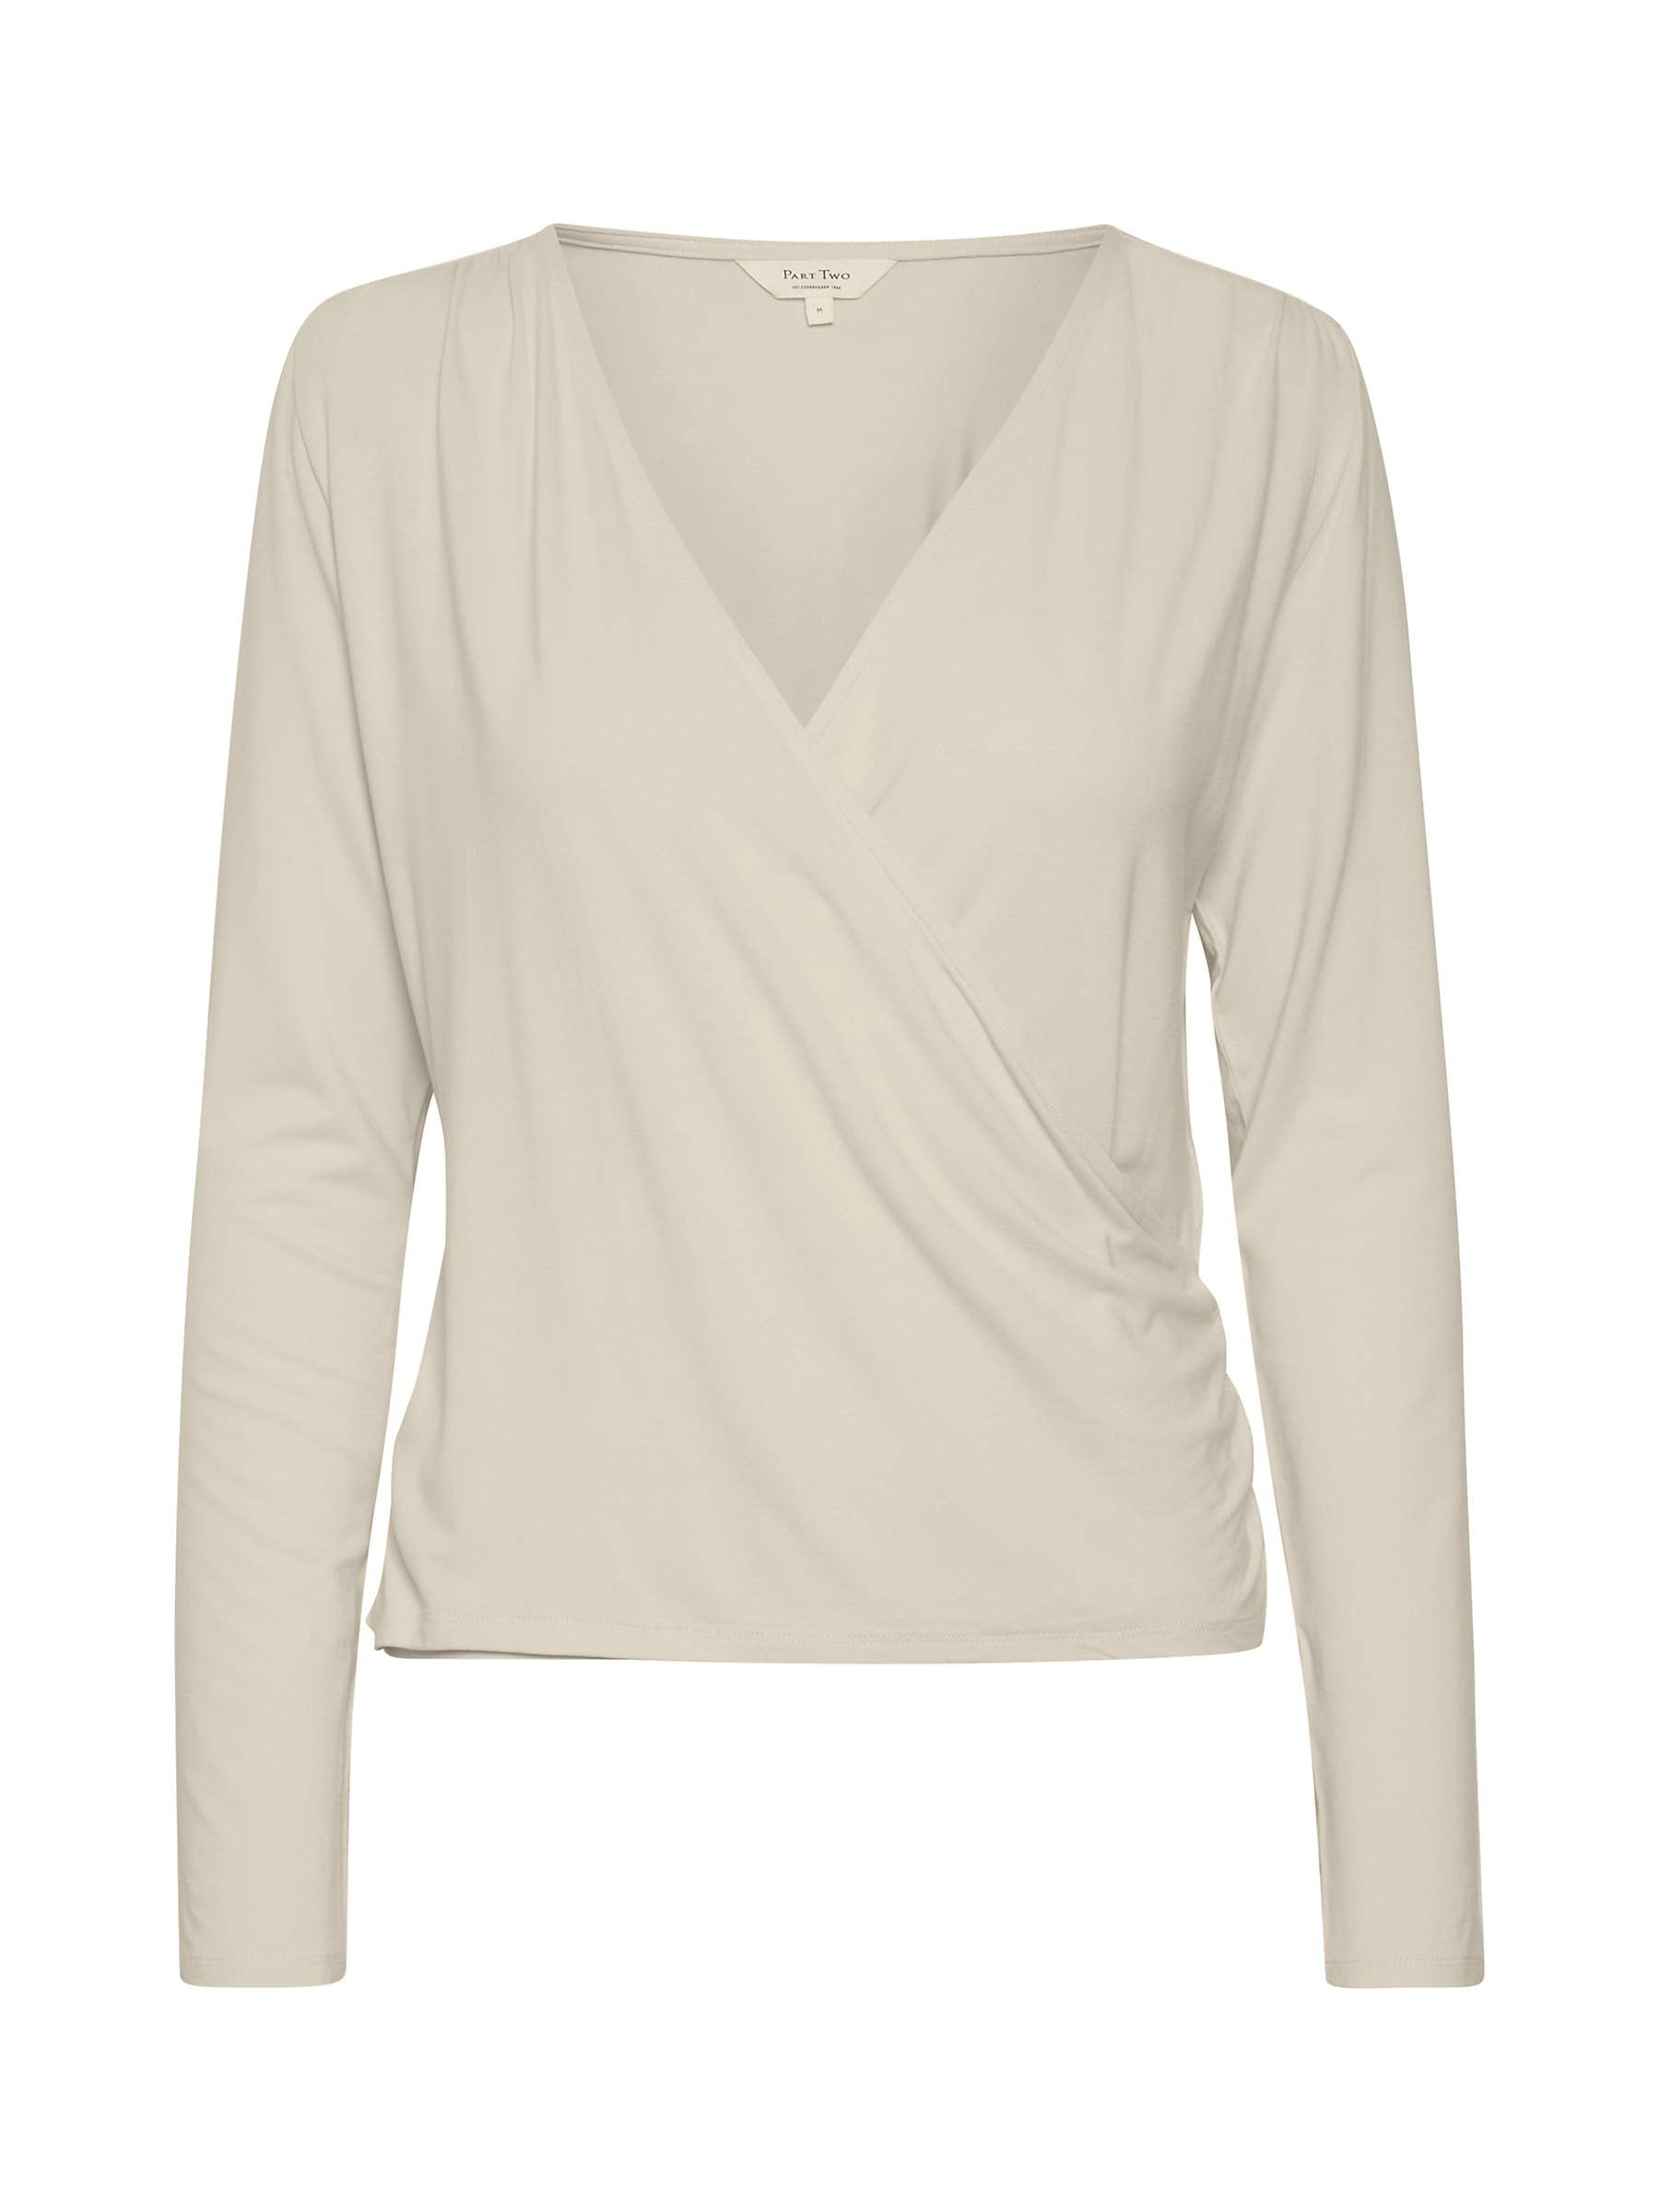 Buy Part Two Annalia Wrap Top Online at johnlewis.com